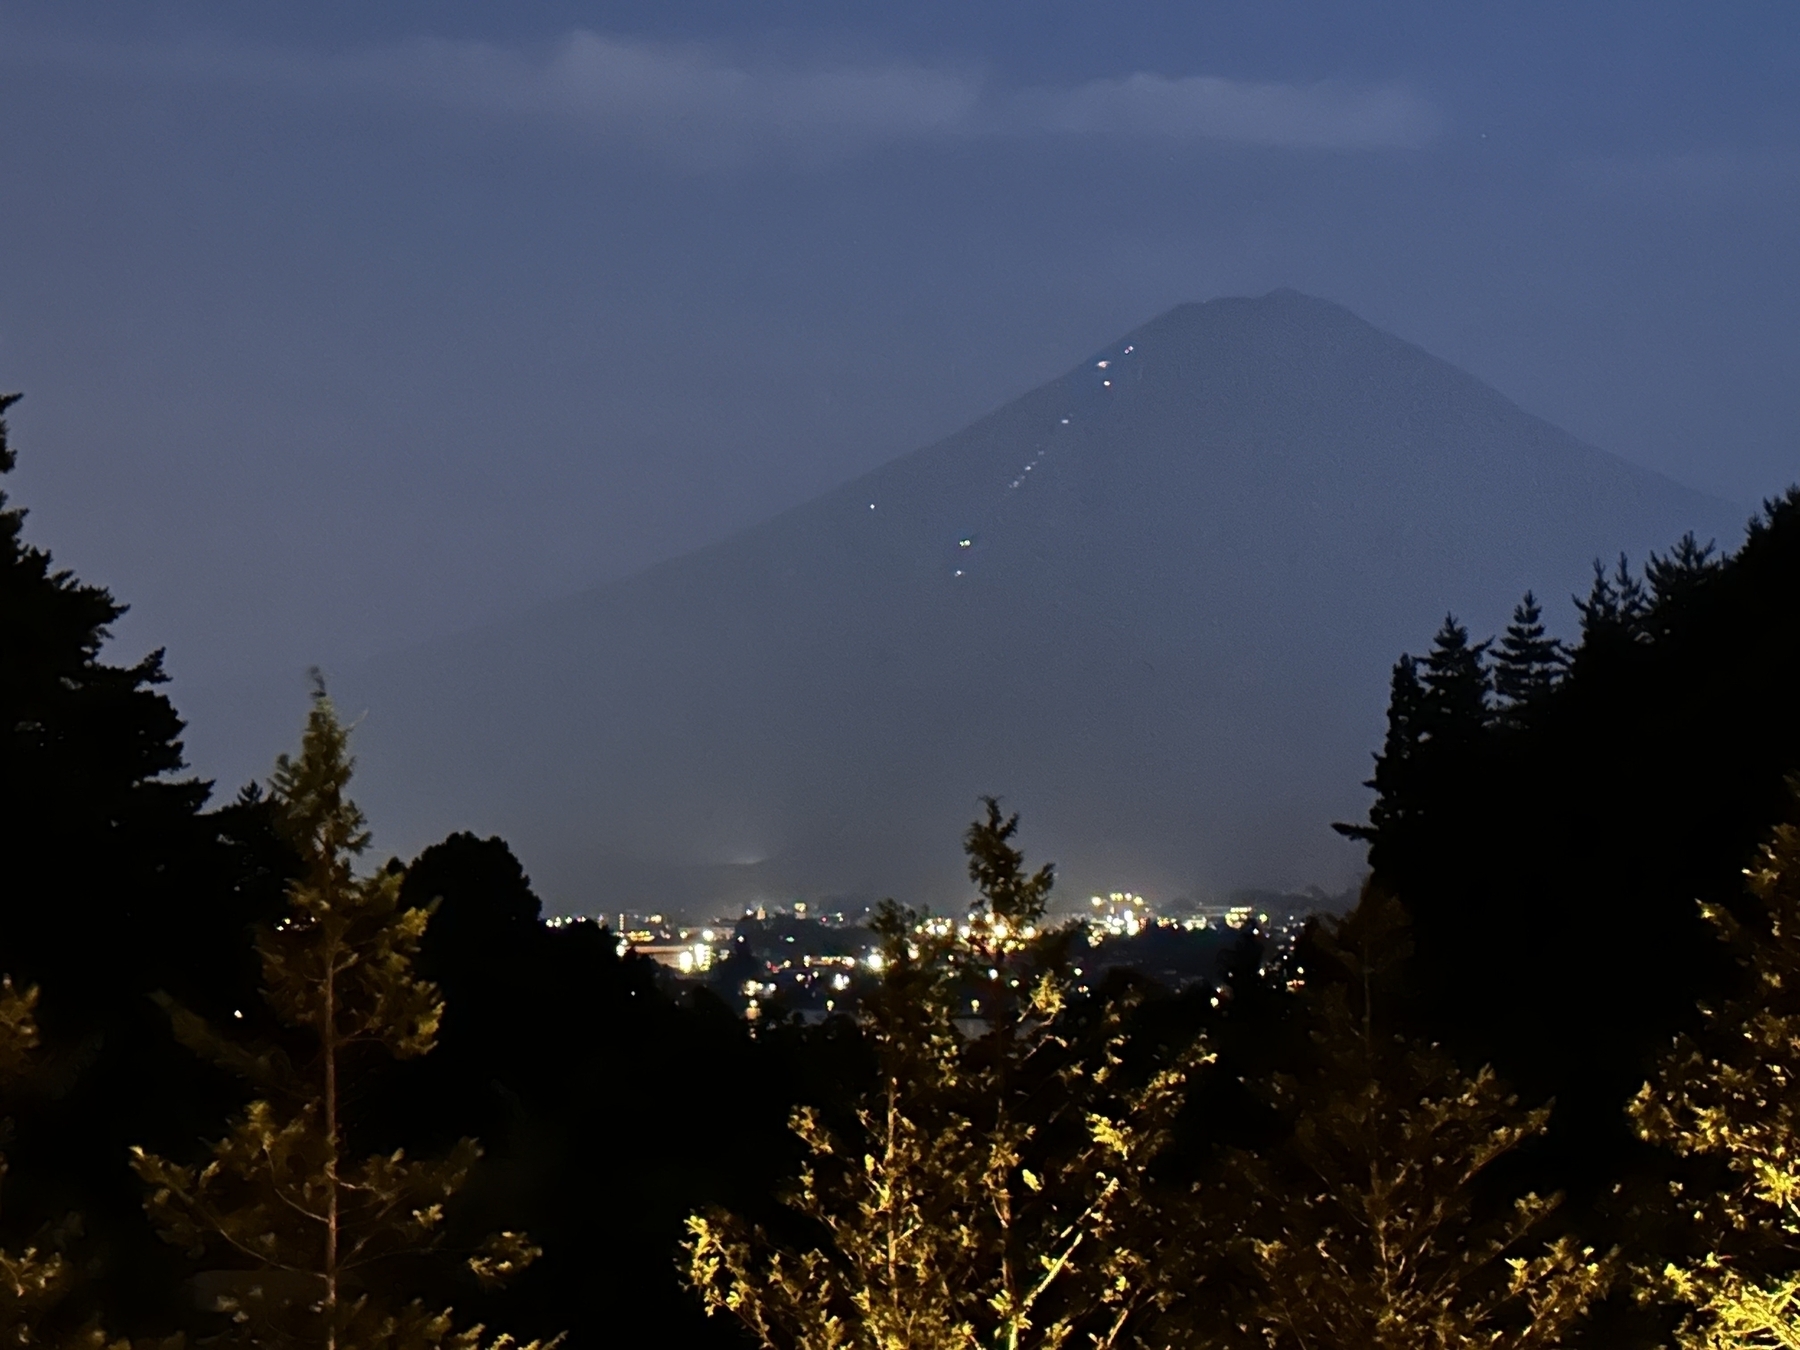 Lights of the nighttime hikers on Mt. Fuji. (3-second exposure.)